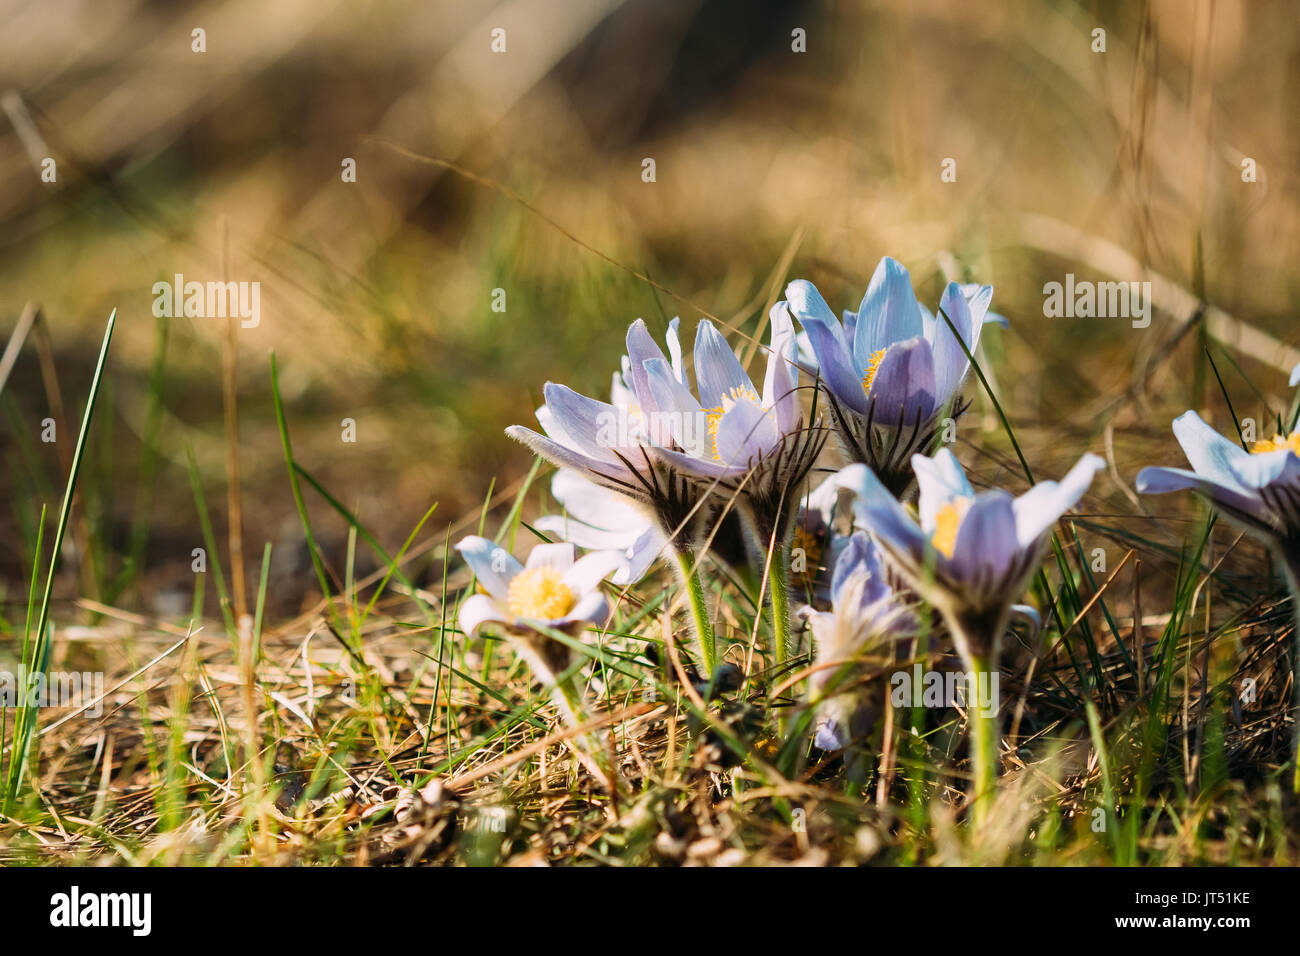 Wild Spring Flowers Pulsatilla Patens. Flowering Blooming Plant In Family Ranunculaceae, Native To Europe, Russia, Mongolia, China, Canada And United  Stock Photo